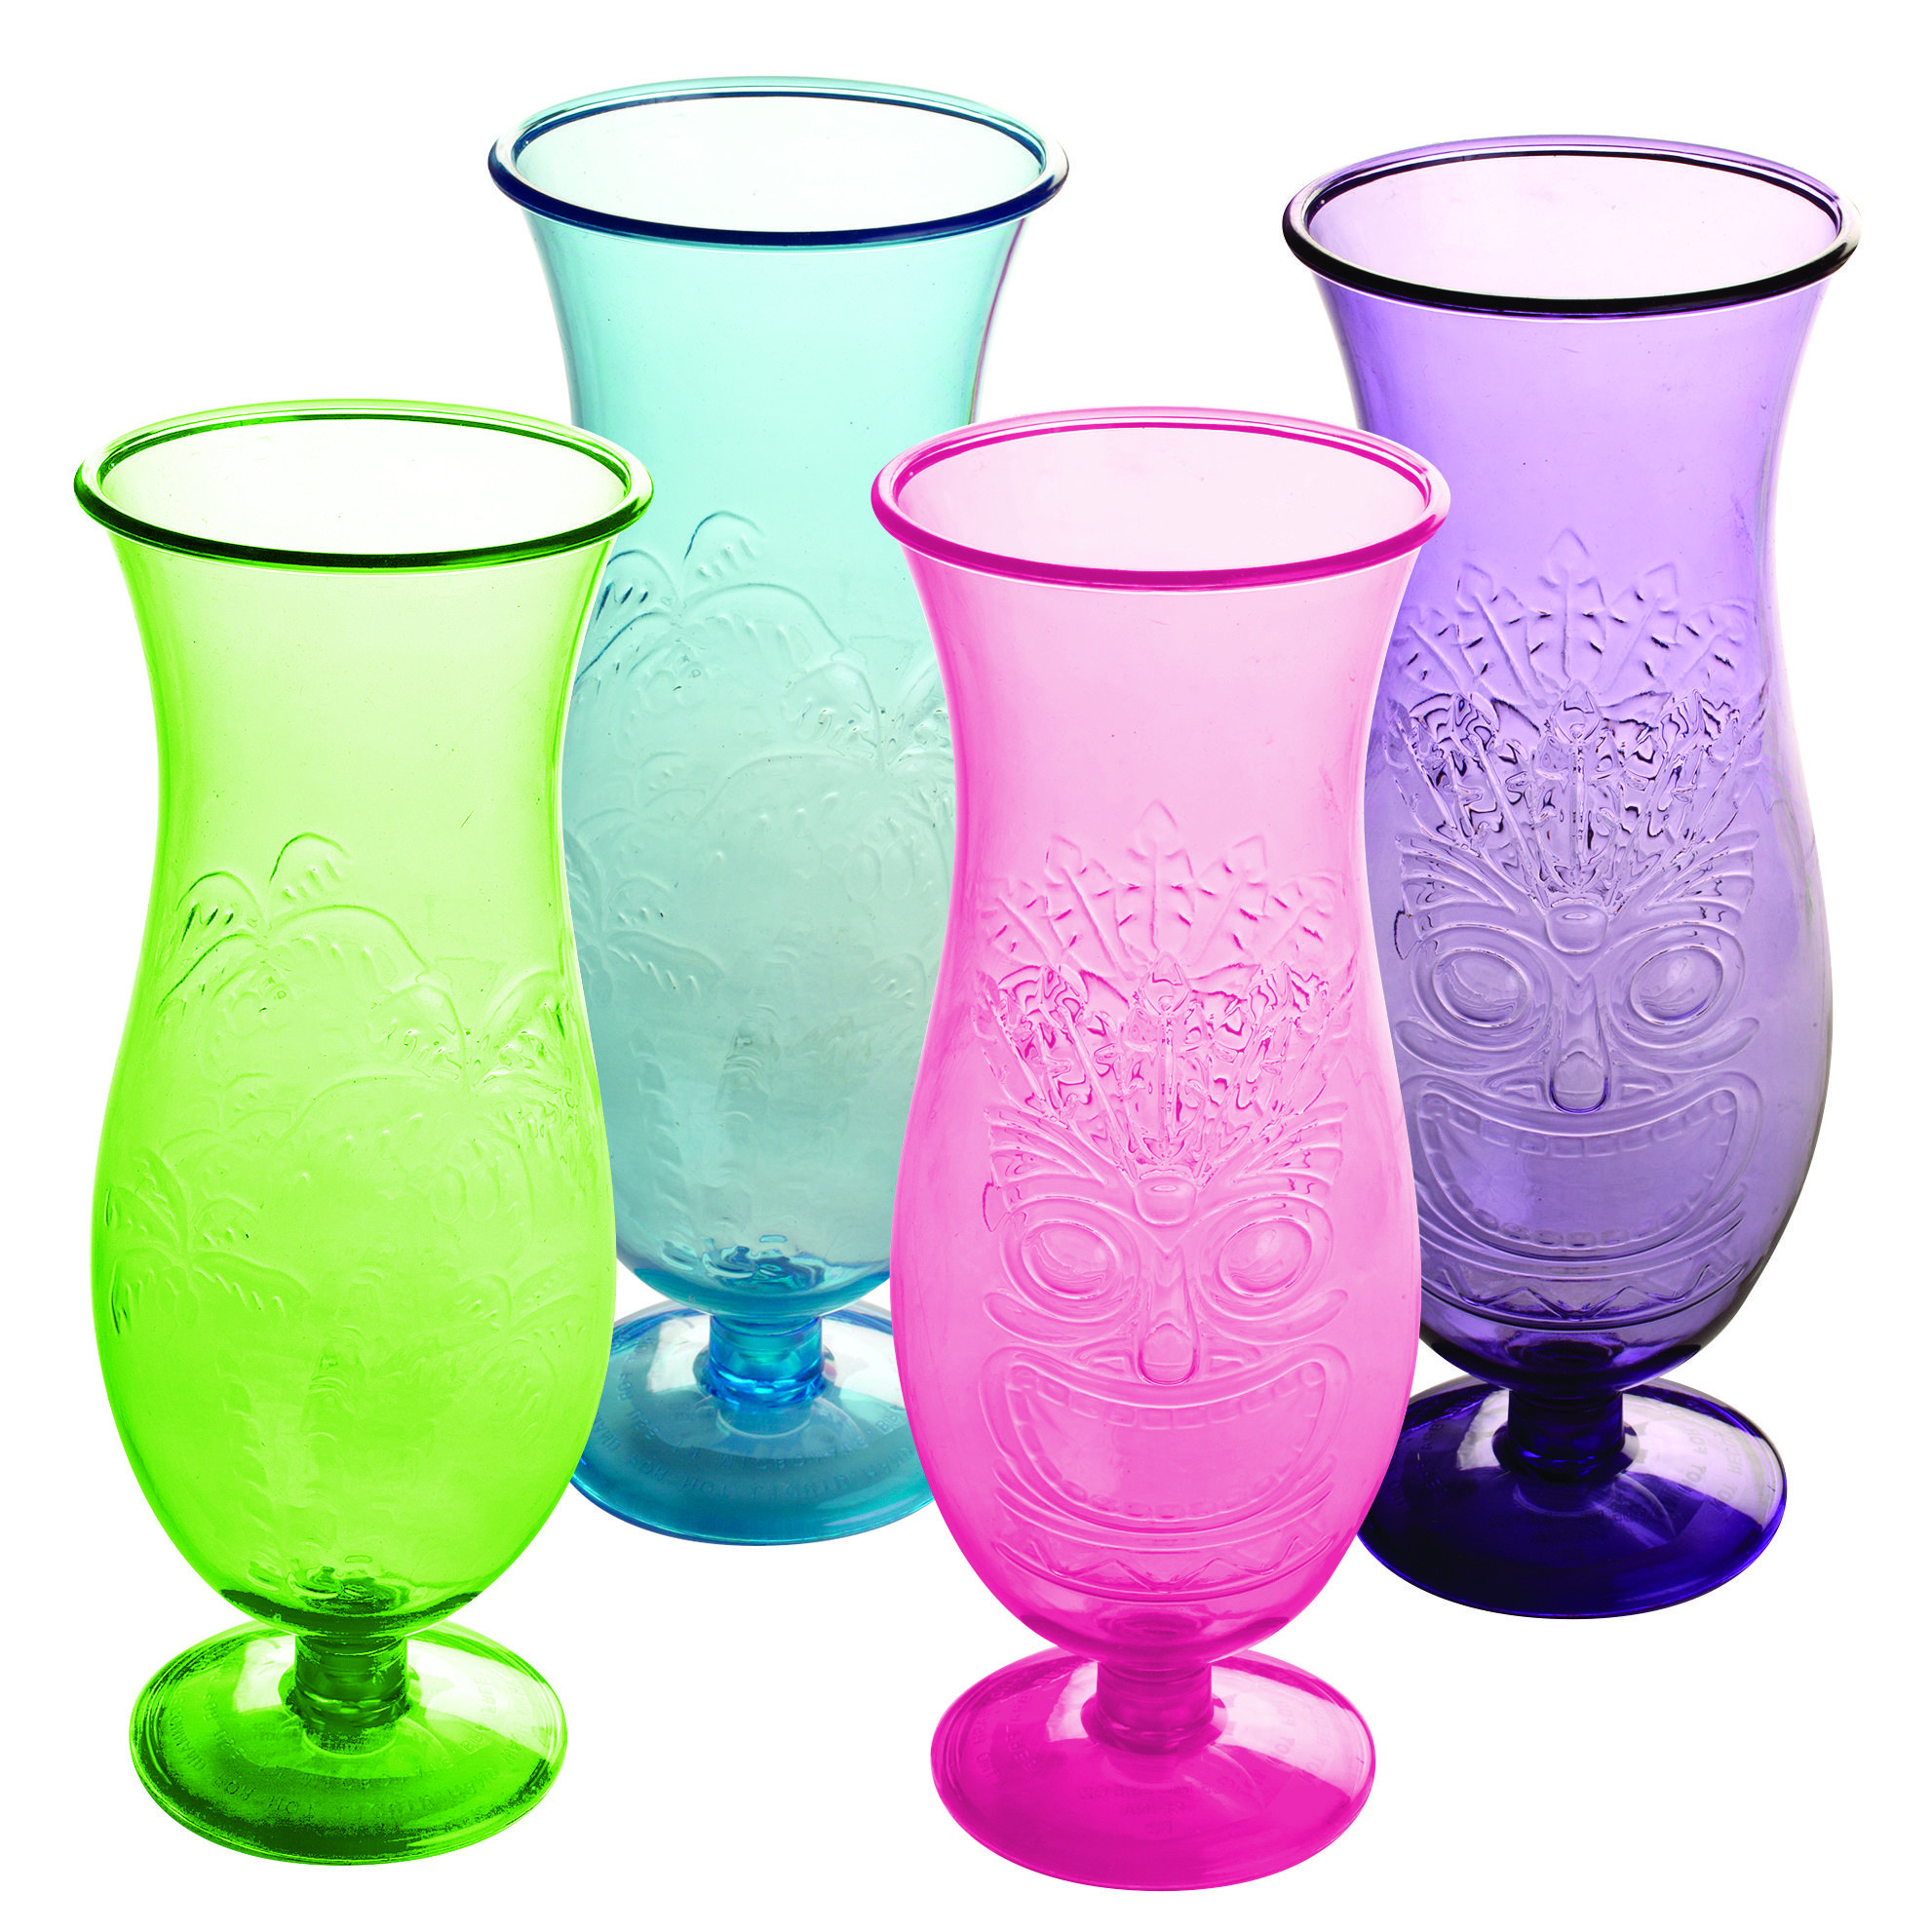 27 Popular Dollar Tree Hurricane Vase 2024 free download dollar tree hurricane vase of bulk plastic luau hurricane glasses 24 4 oz at dollartree com in check out dollar trees new summer fun collection of tropical themed and luau patterned